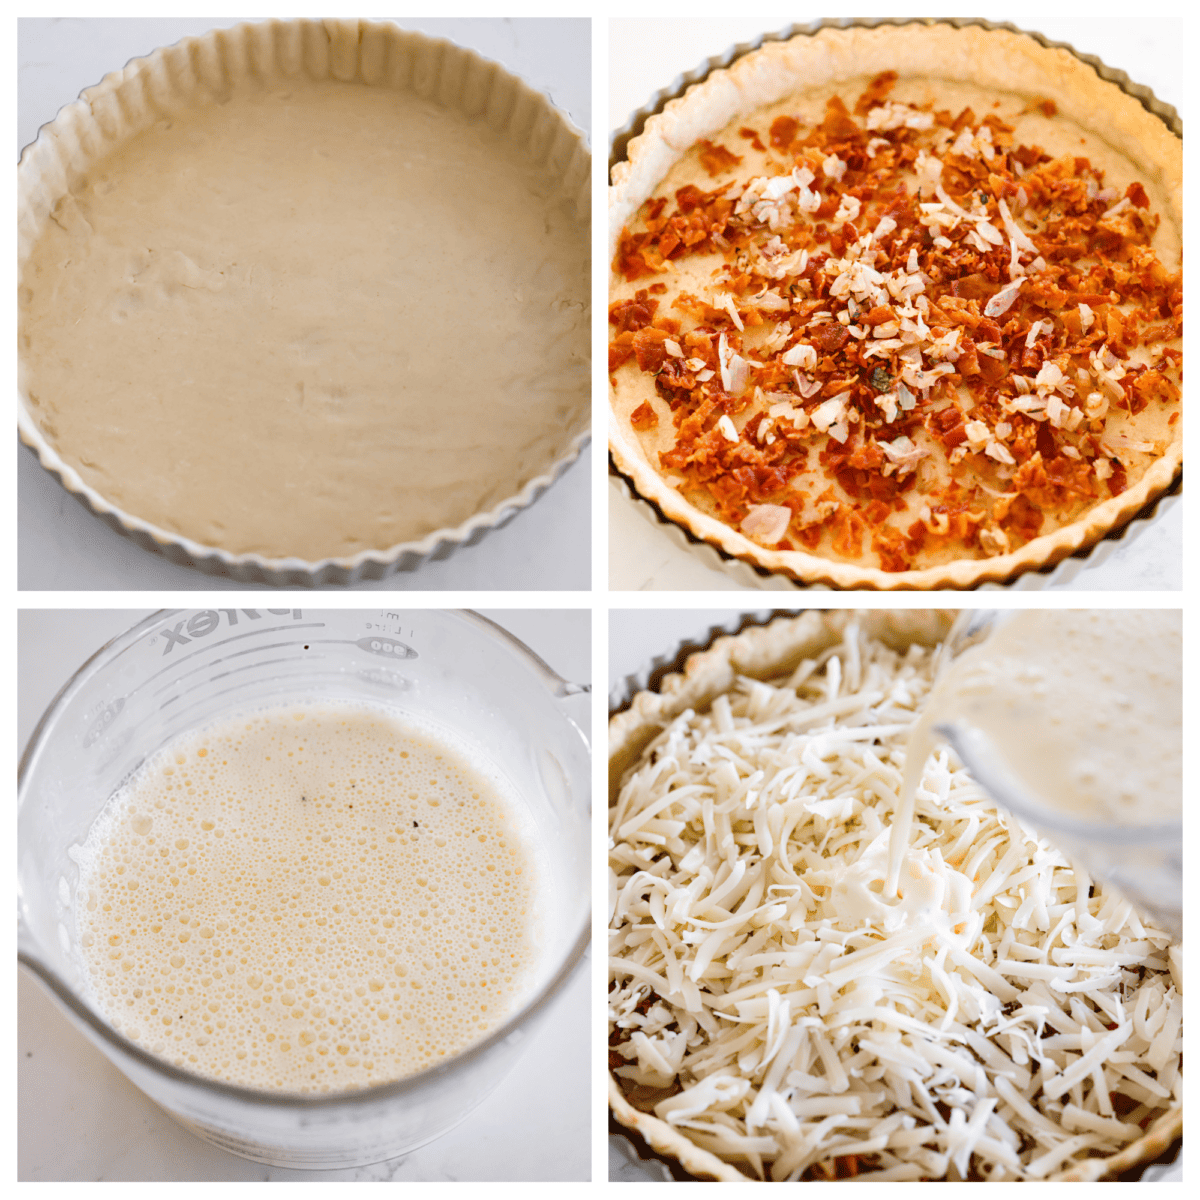 4-photo collage of the quiche mixture being added to a pie crust.